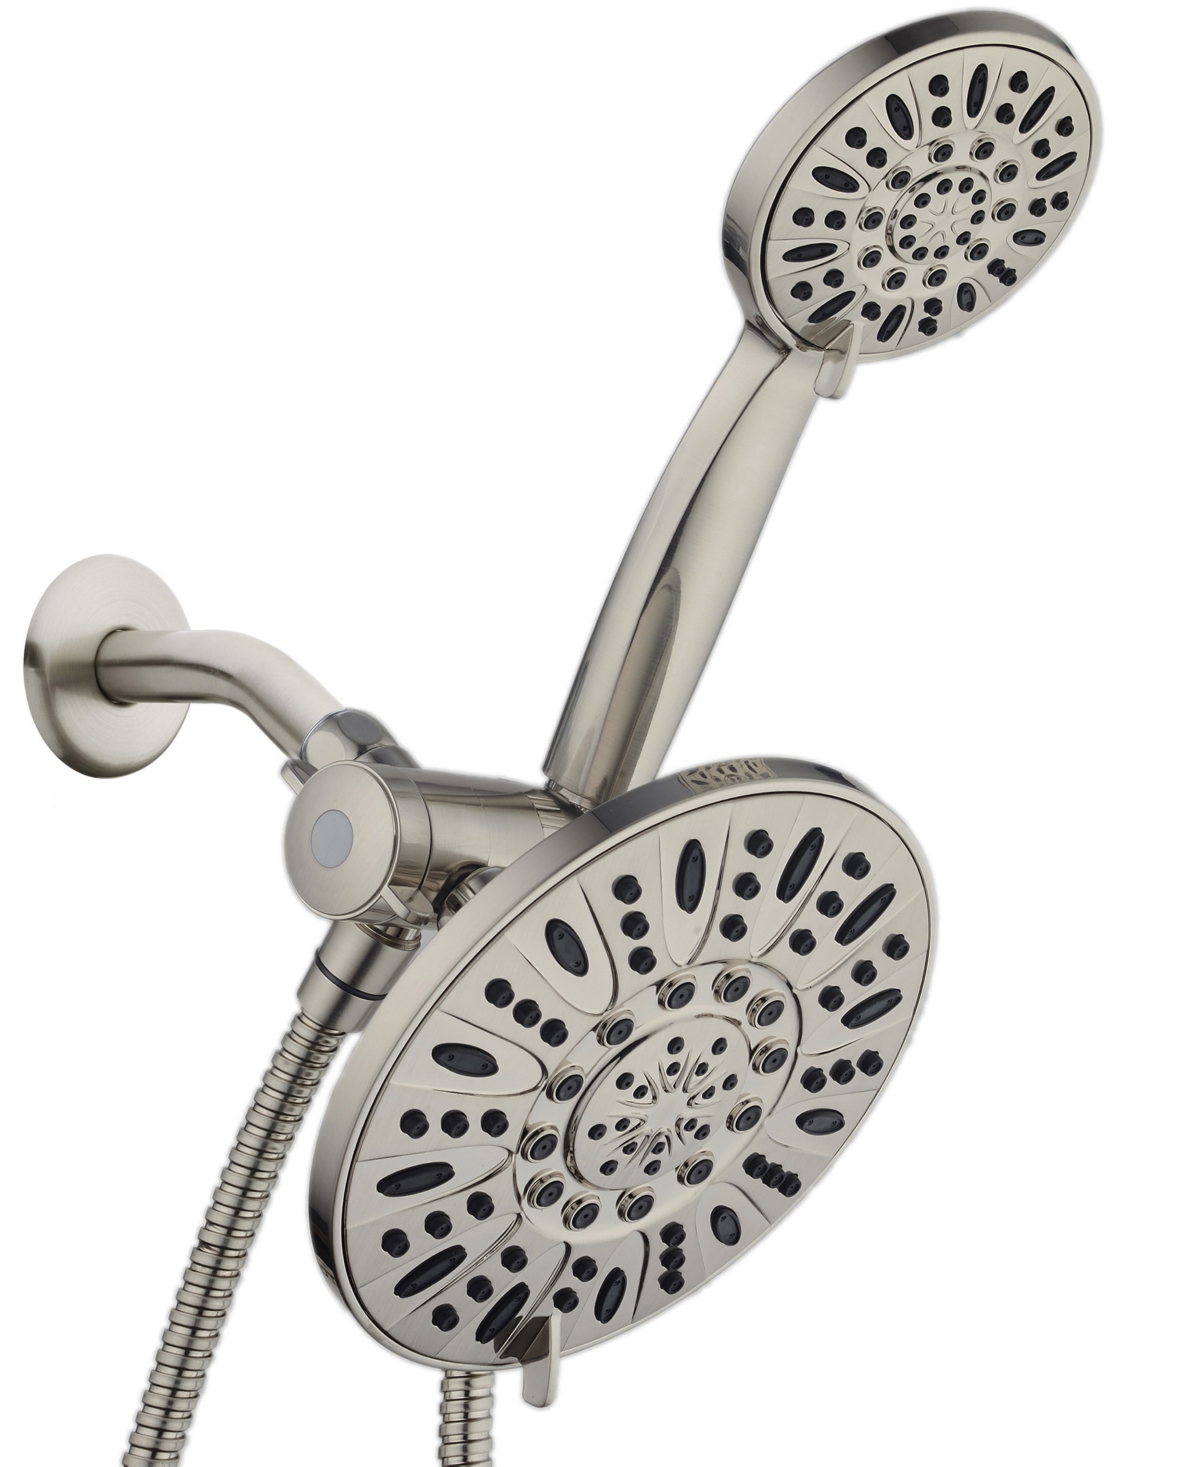 High-Pressure 48-Setting Shower Head Combo with Extra-long 6 Foot Hose - Brushed Nickel